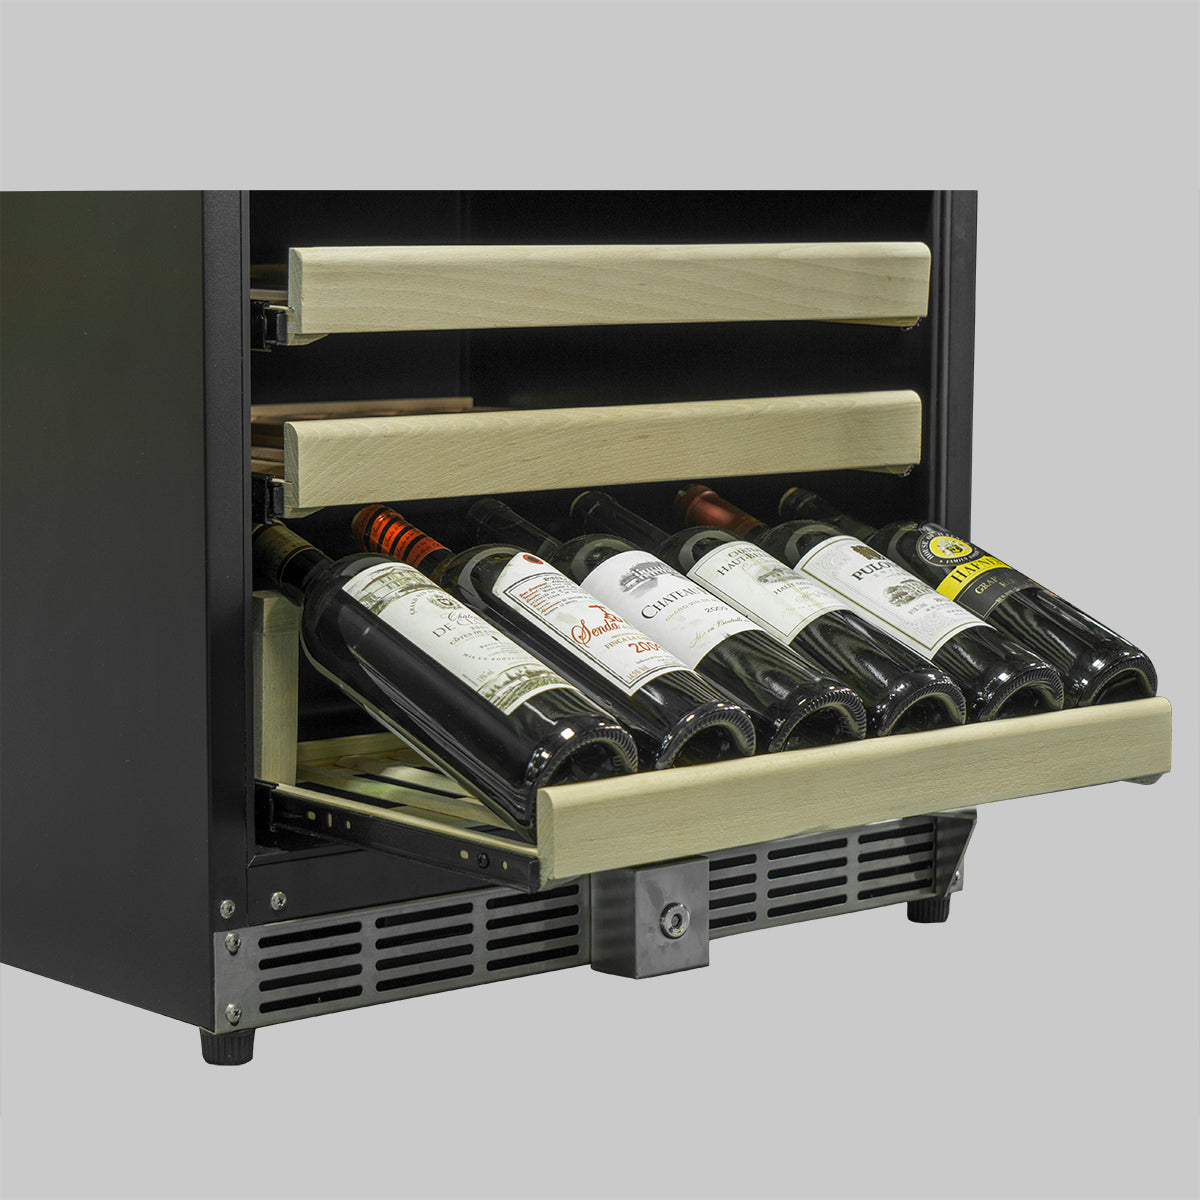 48 Inch Glass Door Side By Side Wine And Beverage Cooler Combo